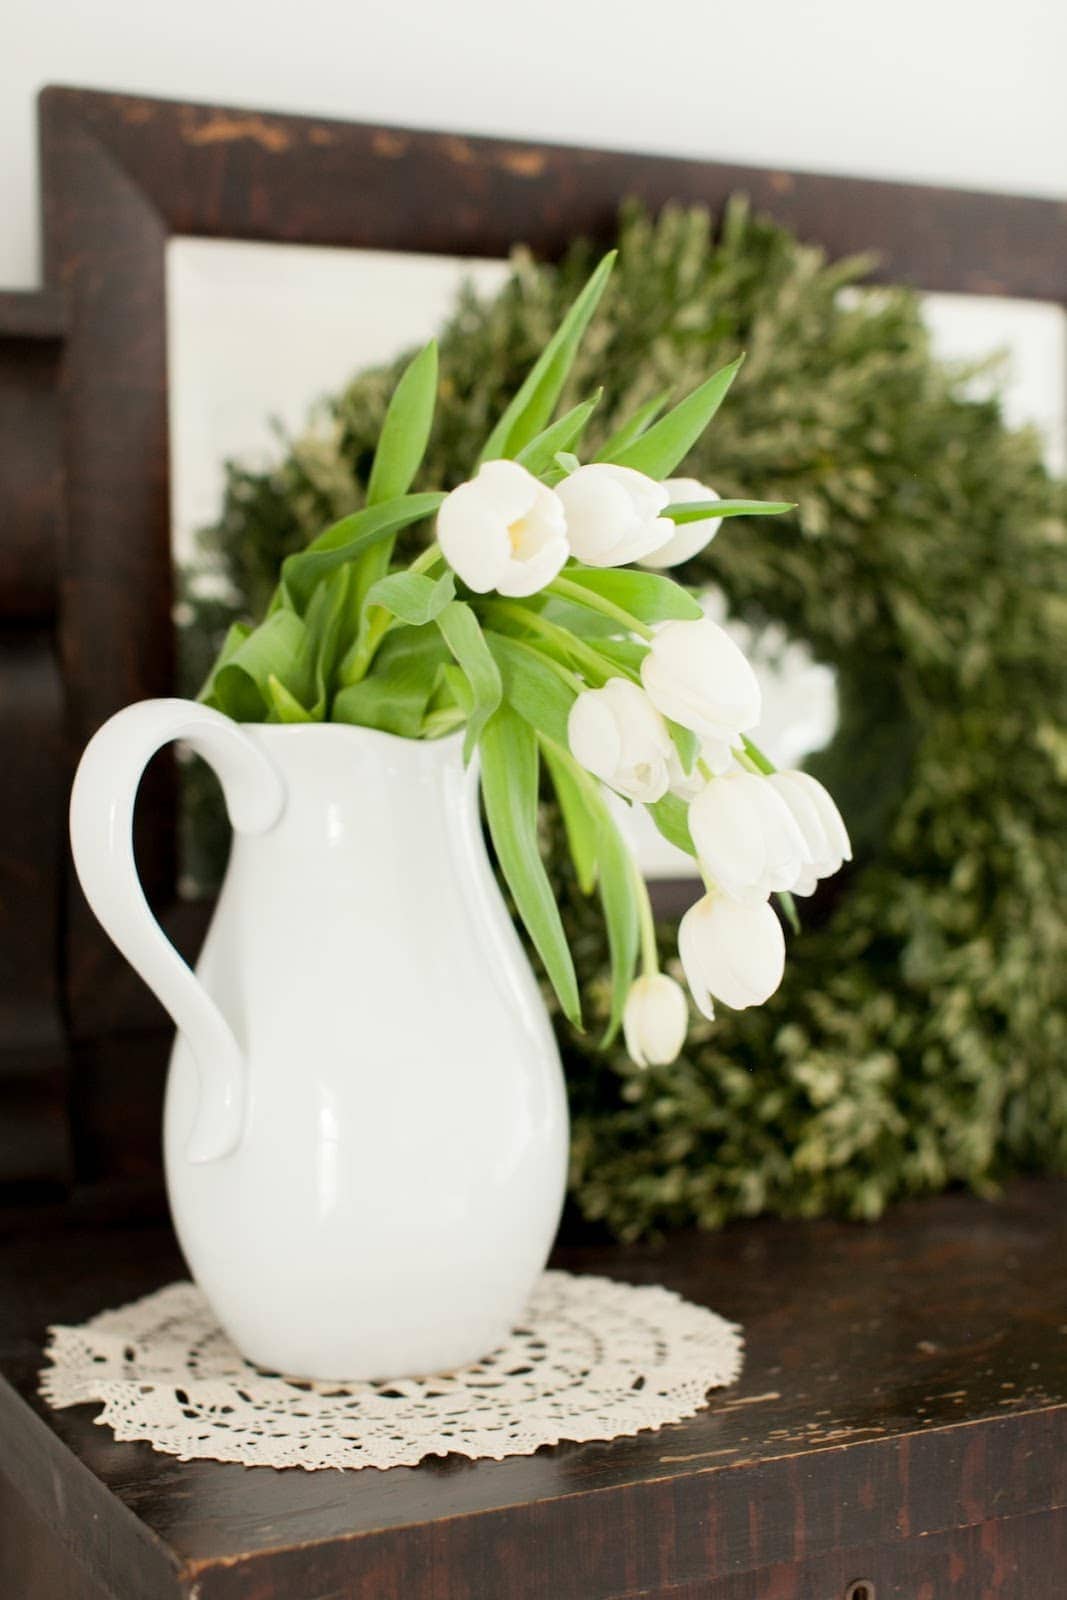 A white pitcher filled with white tulips.